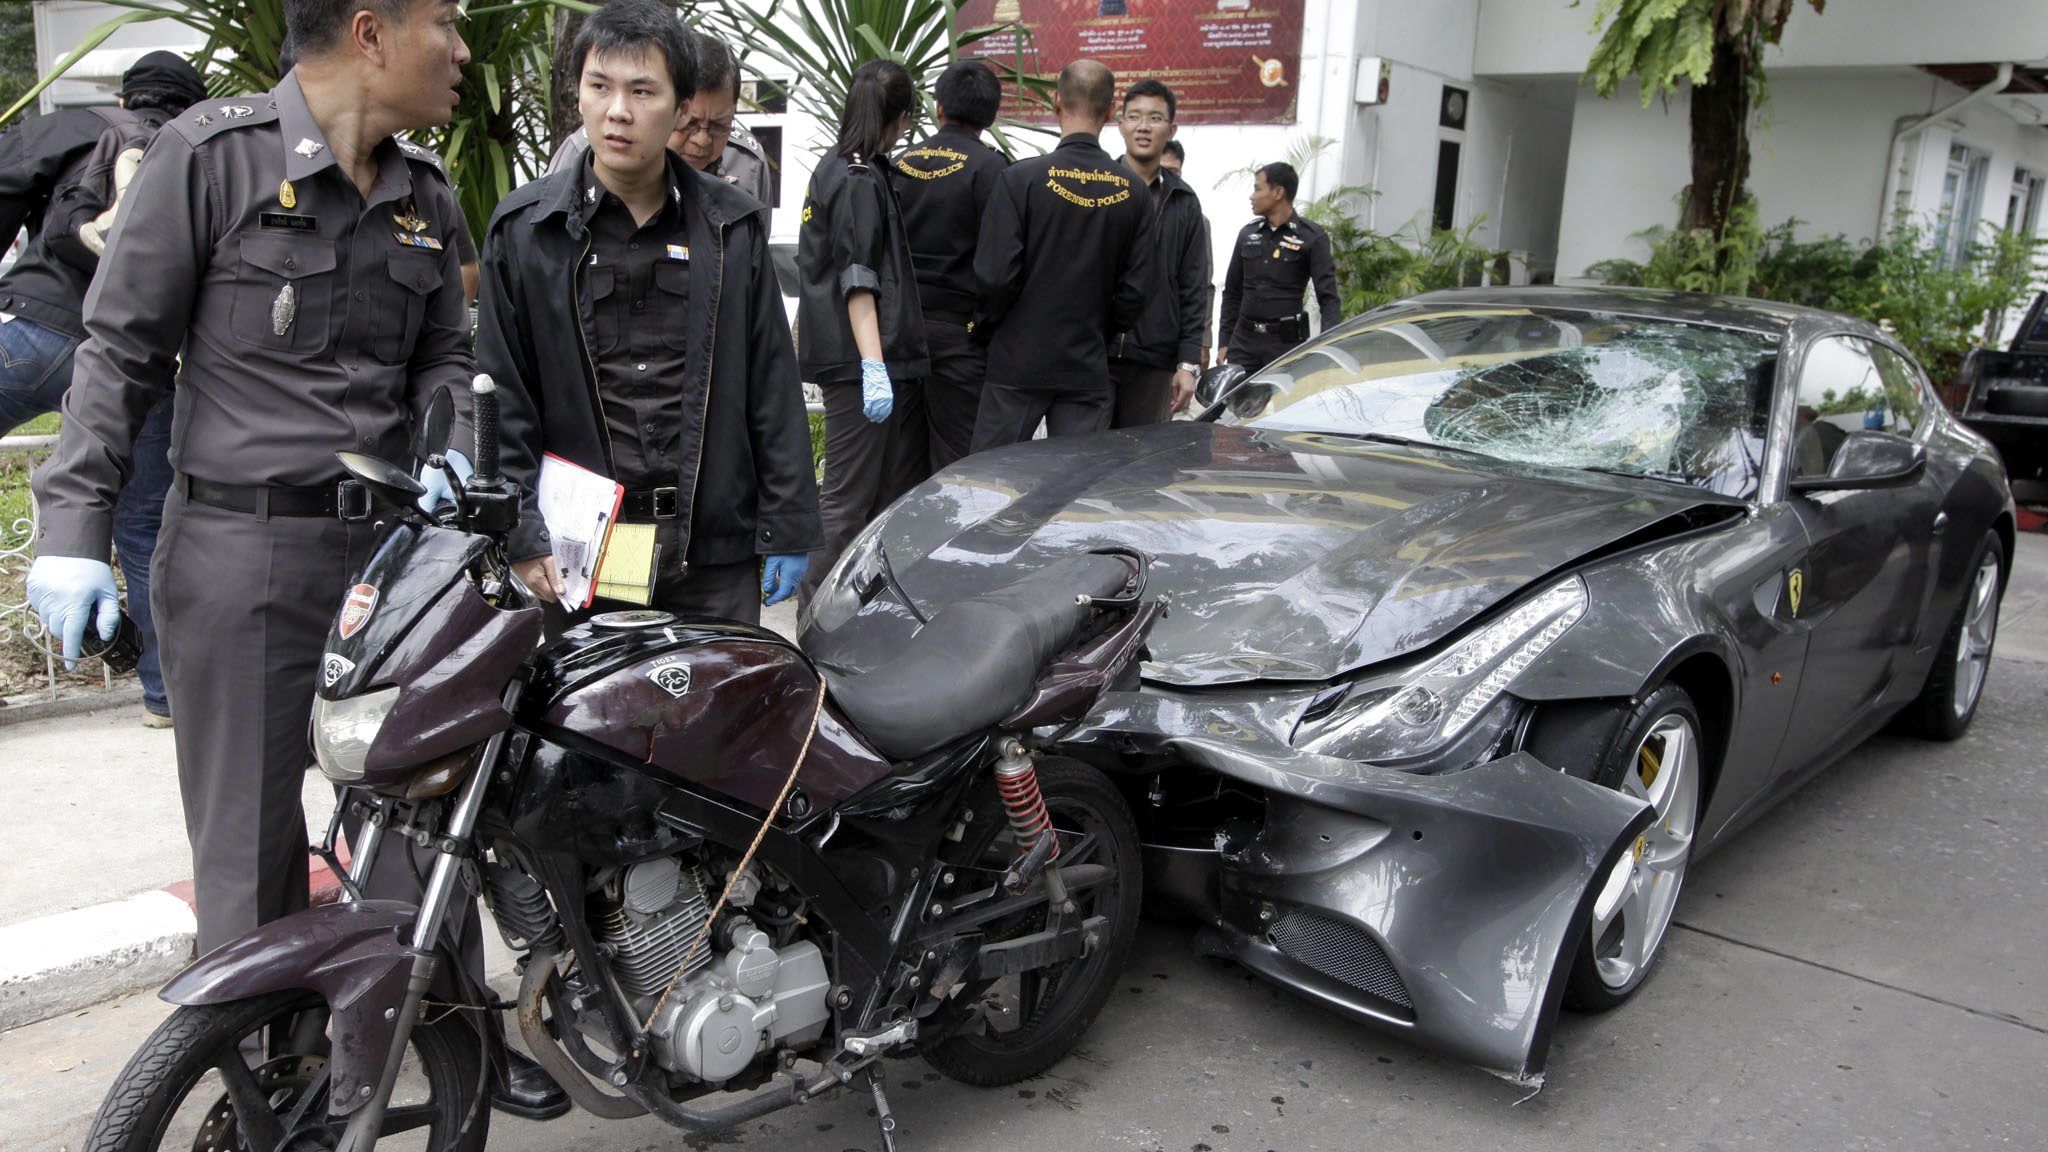 Thai police officers inspect a Ferrari owned by Vorayuth Yoovidhya in Bangkok, in September 2012.